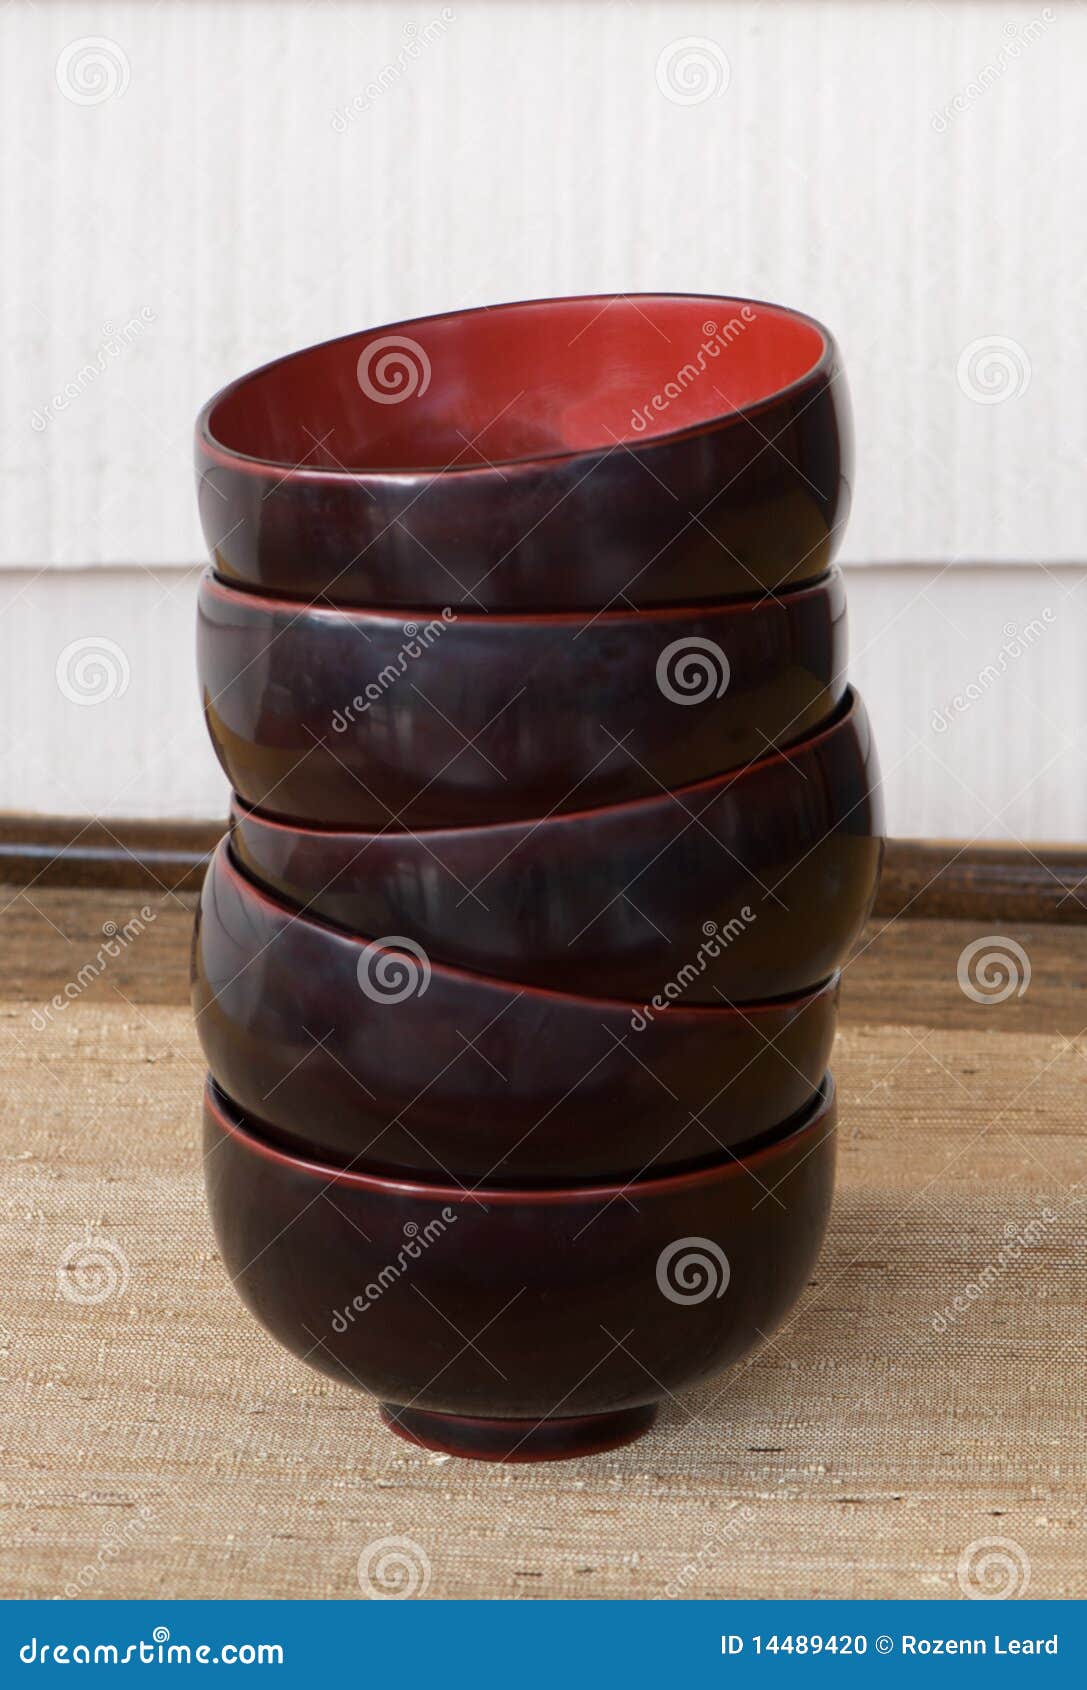 japanese lacquer bowls